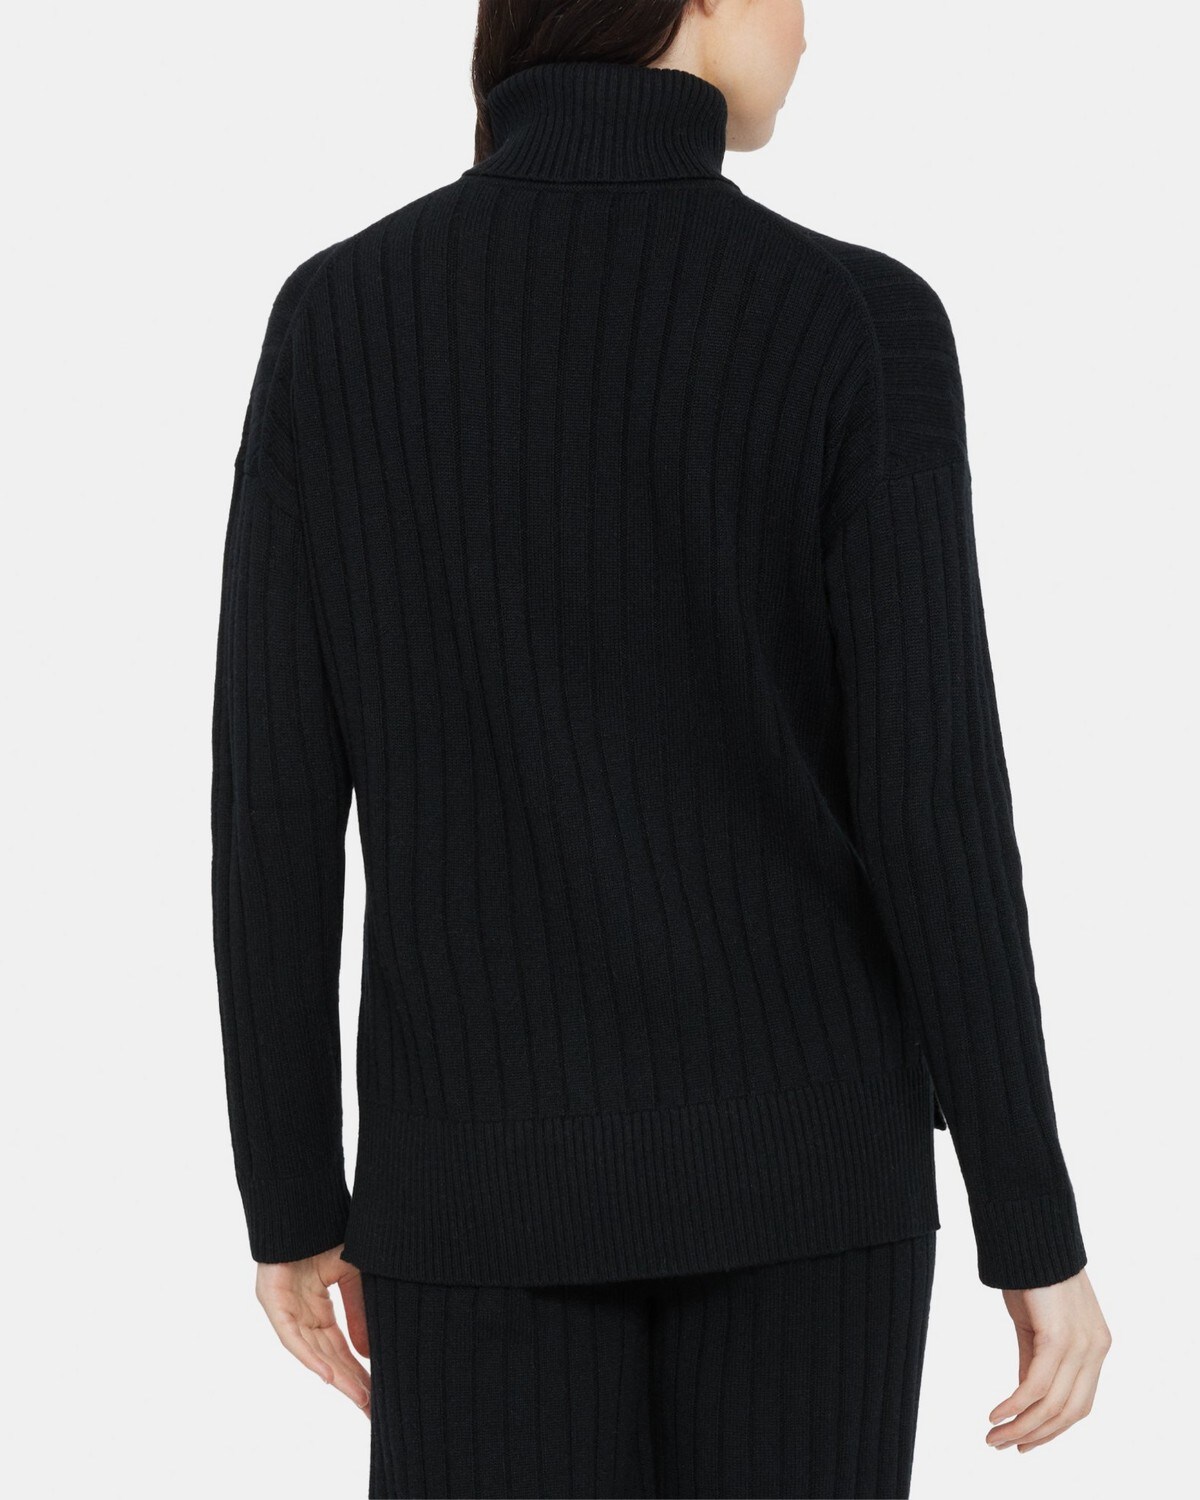 Ribbed Turtleneck in Wool-Cashmere